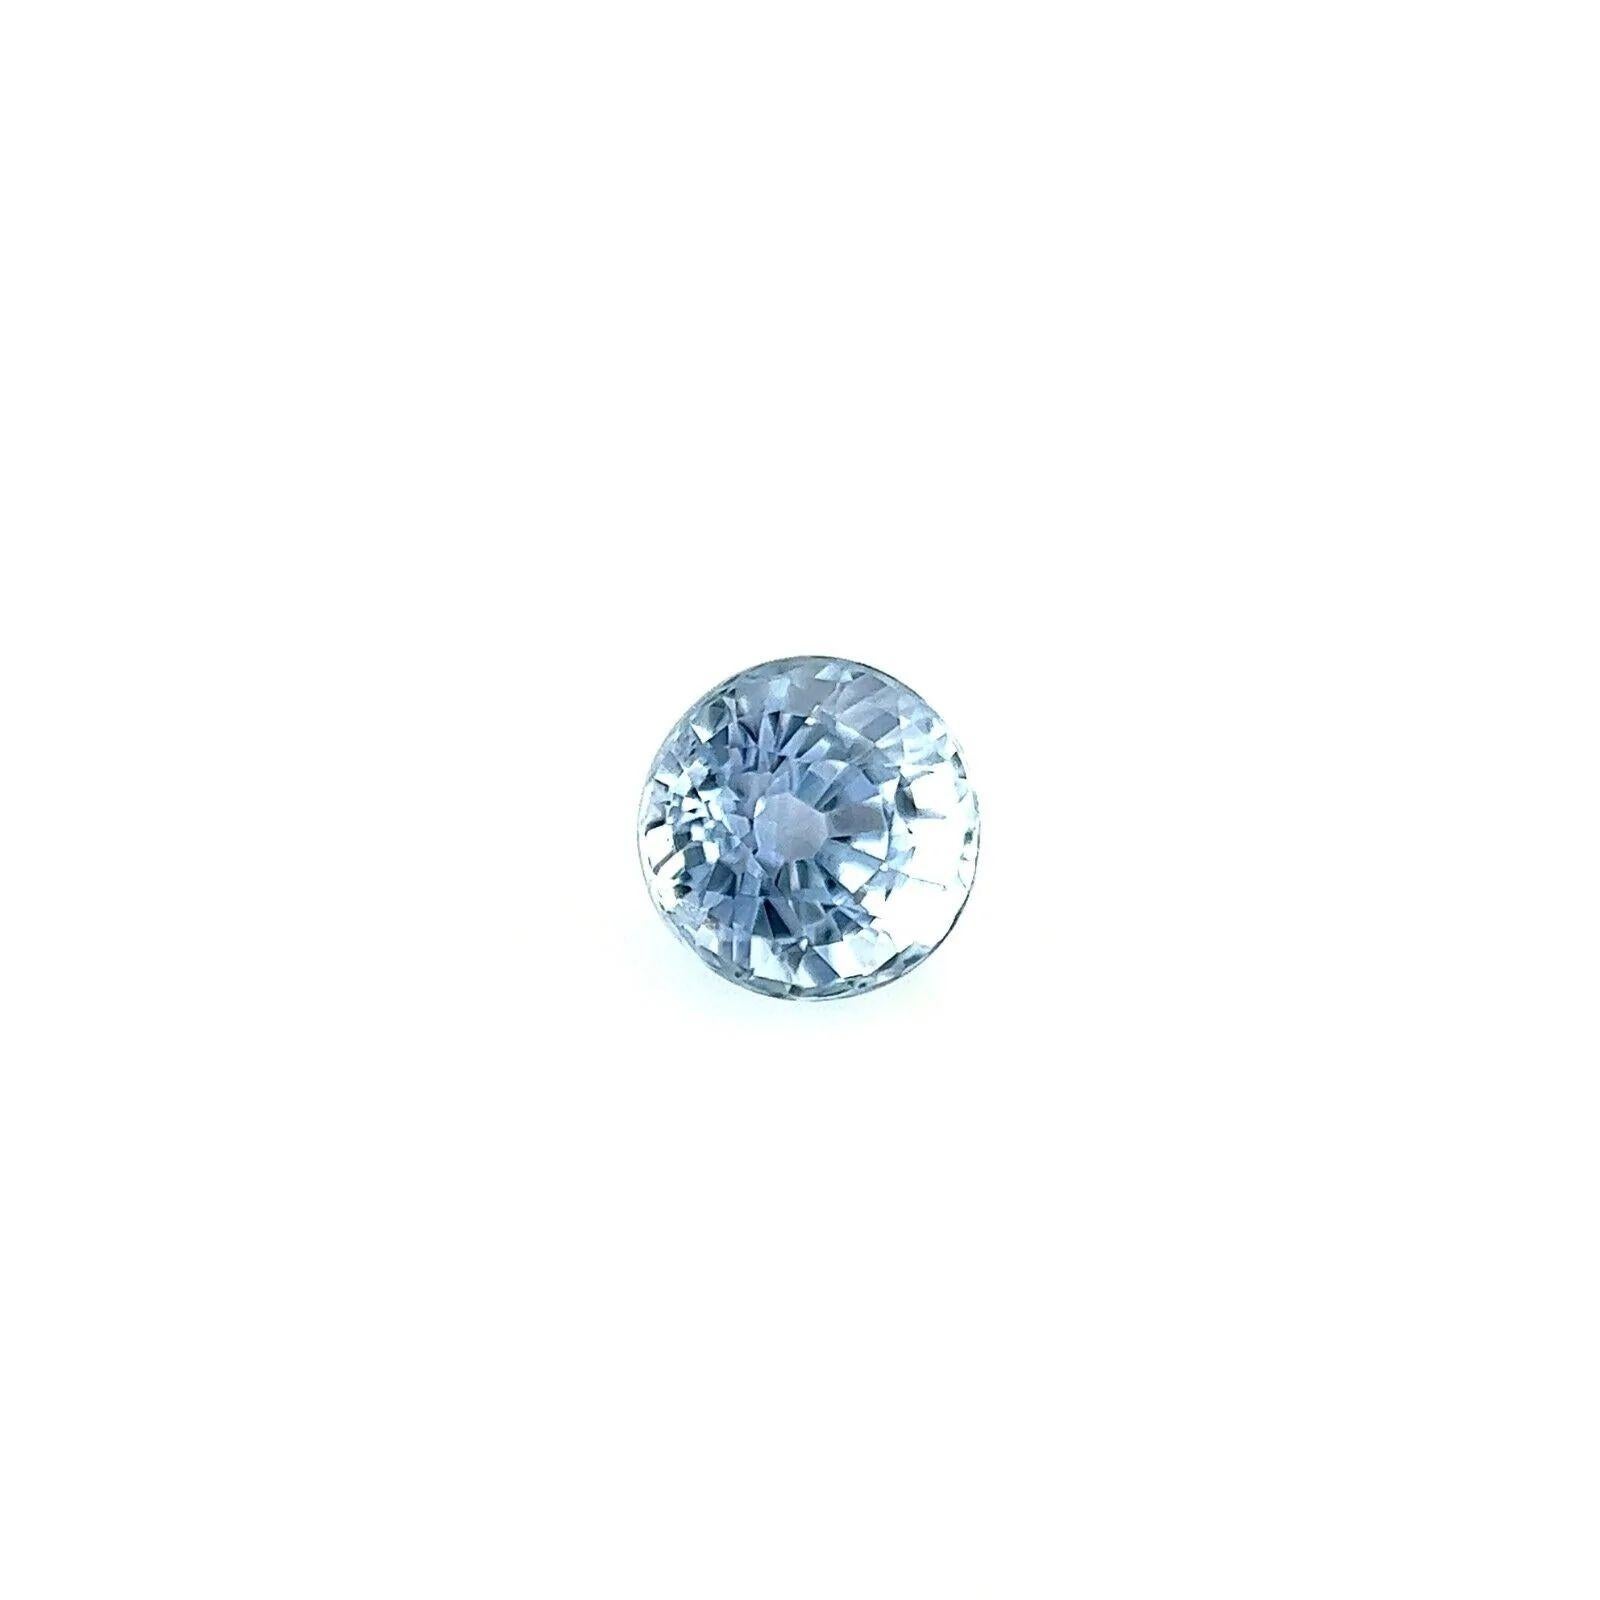 Fine 0.87ct Light Blue Ceylon Sapphire Round Cut Loose Rare Gem 5mm VVS

Light Blue Ceylon Sapphire Gemstone.
0.87 Carat with a beautiful light blue colour and very good clarity. Clean stone with only some small natural inclusions visible when